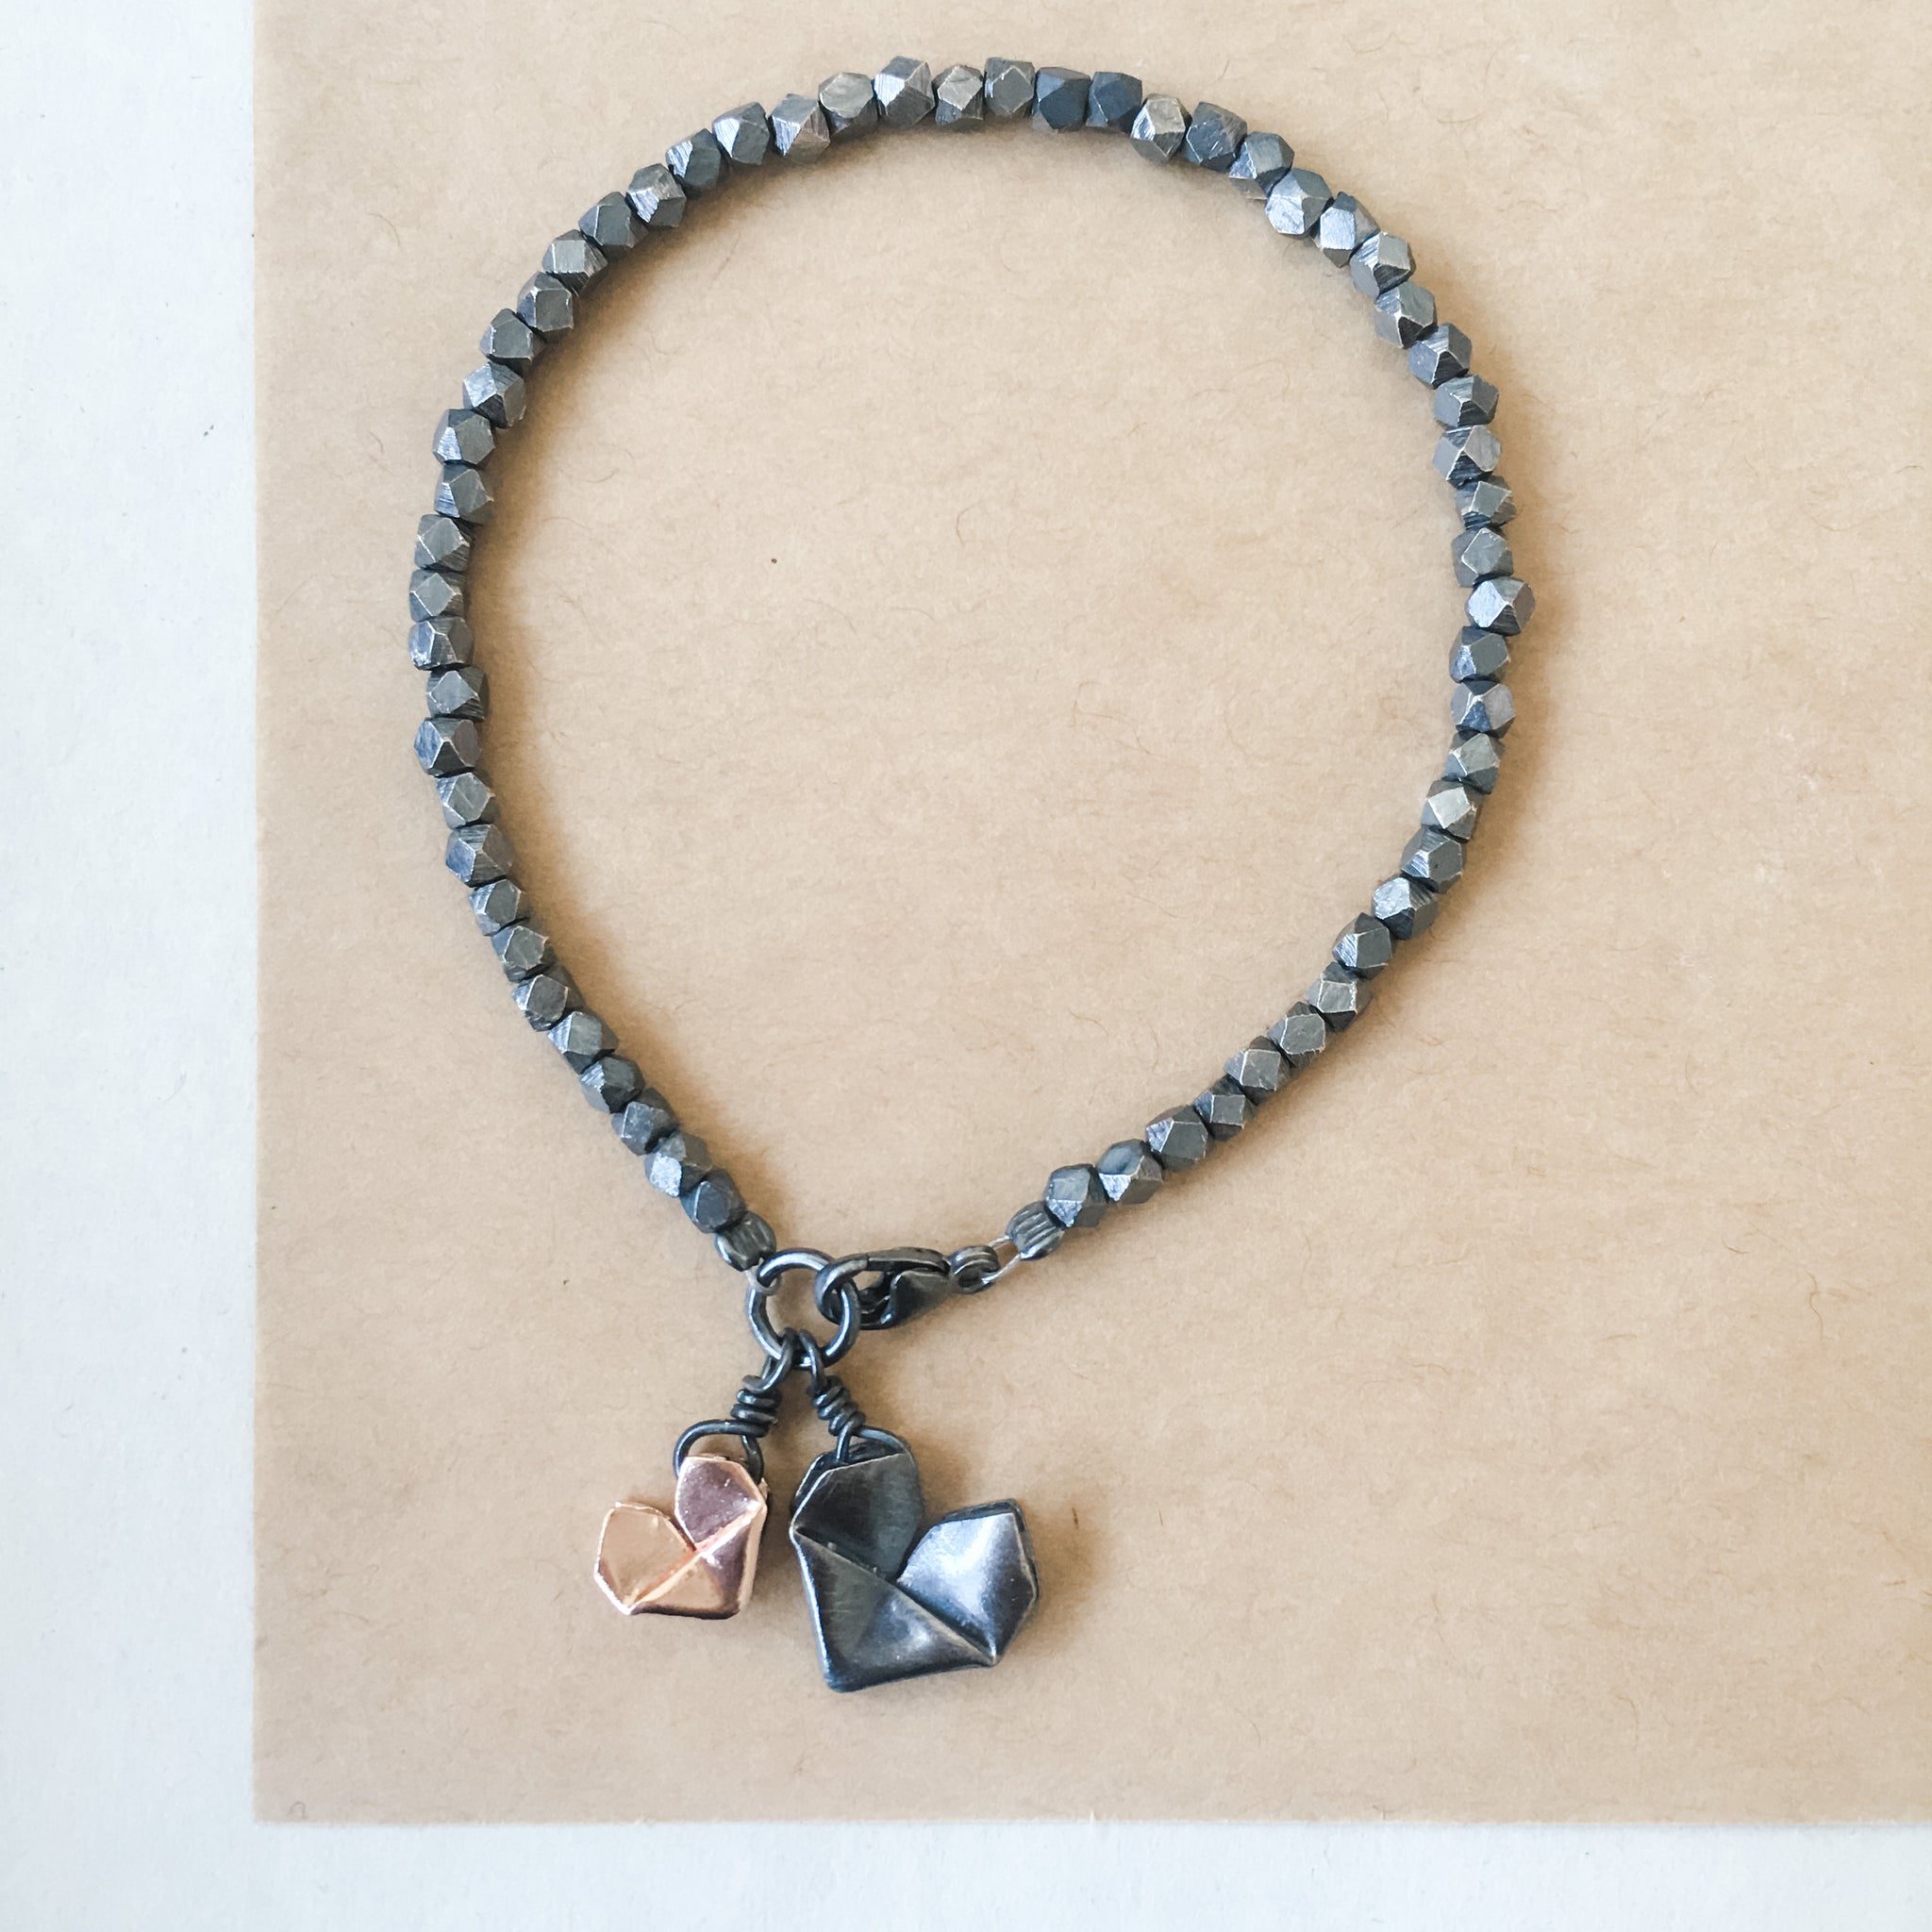 Black Silver Origami Big and Small Hearts Bracelet